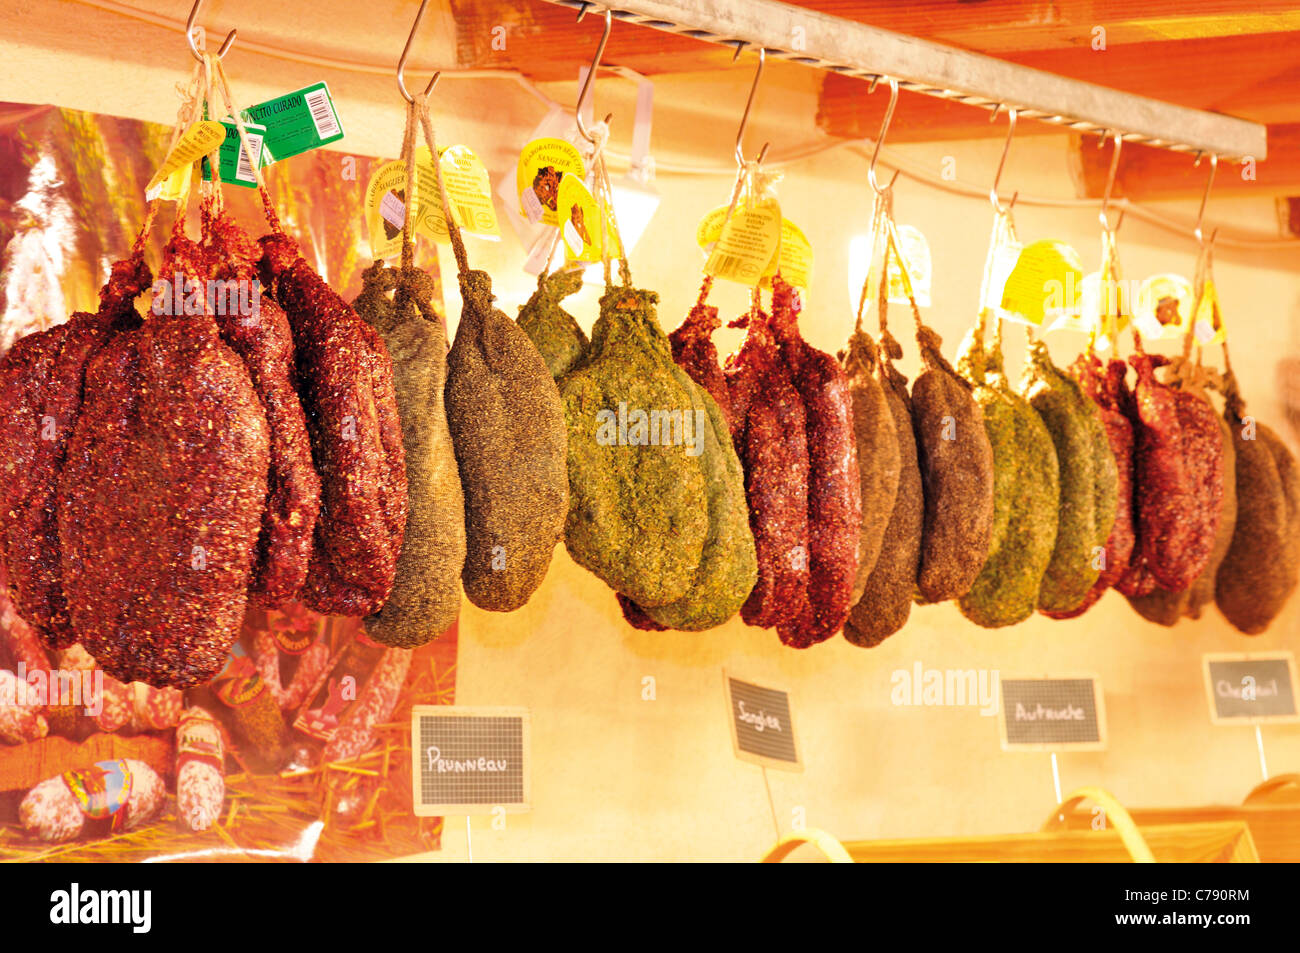 France, Correze: Gourmet shop  in Collonges-la-Rouge with  ham from Spain Stock Photo